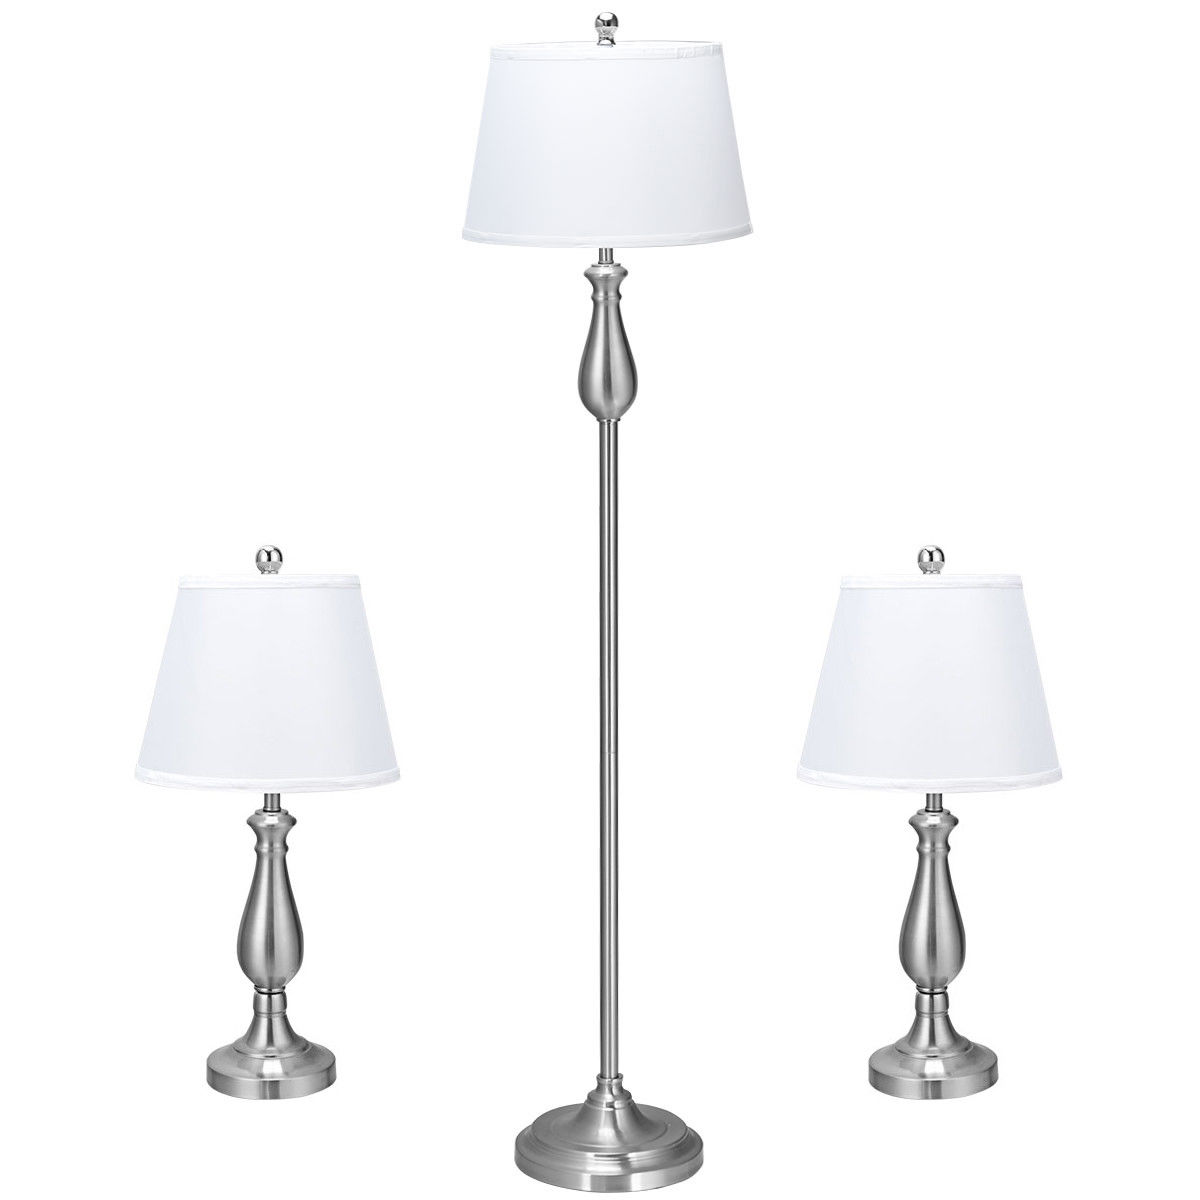 Modern Lamp Set of 3 in Satin Nickel Finish with White Fabric Shades 2 Table Lamps, 1 Floor Lamp Smeike Three Pack Lamp Set H Solid Iron 3-Piece Table and Floor Lamp Set 60 and 25